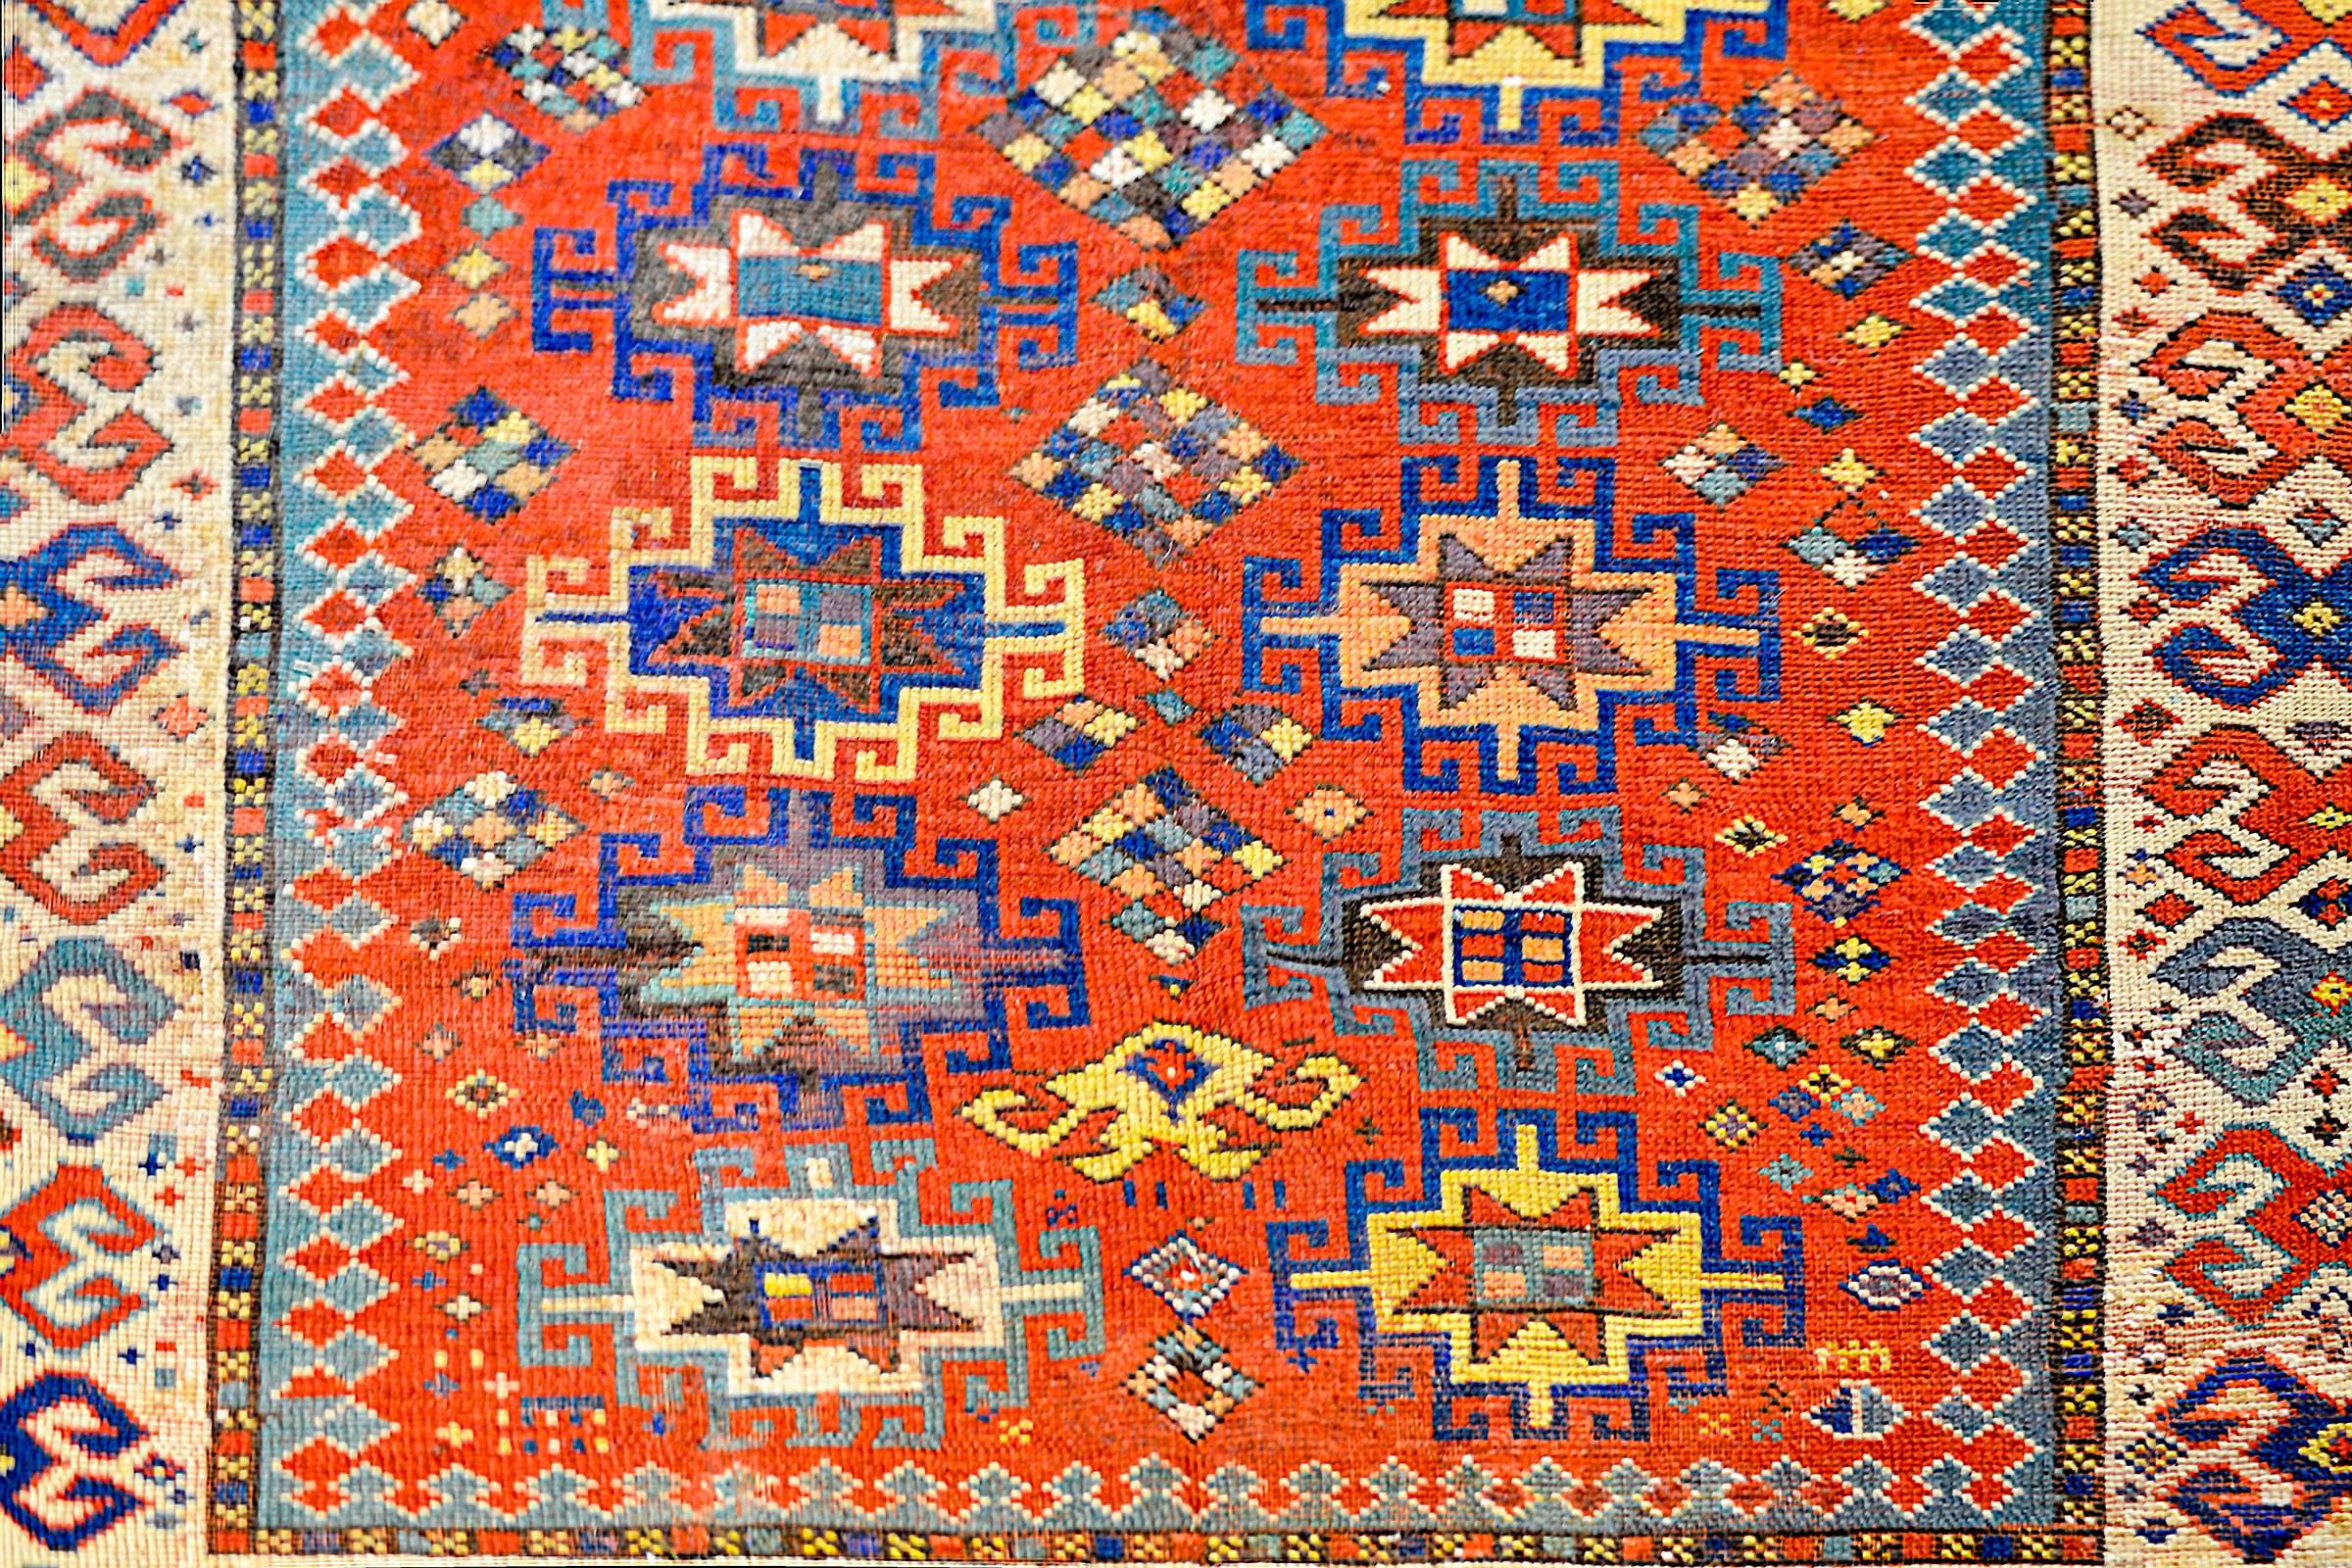 An outstanding early 20th century Lambalo, Caucasus Kazak rug with a beautiful crimson central field containing multiple geometric medallions woven in indigo, green, gold, and brown vegetable dyed wool. The border is wide, with a geometric form